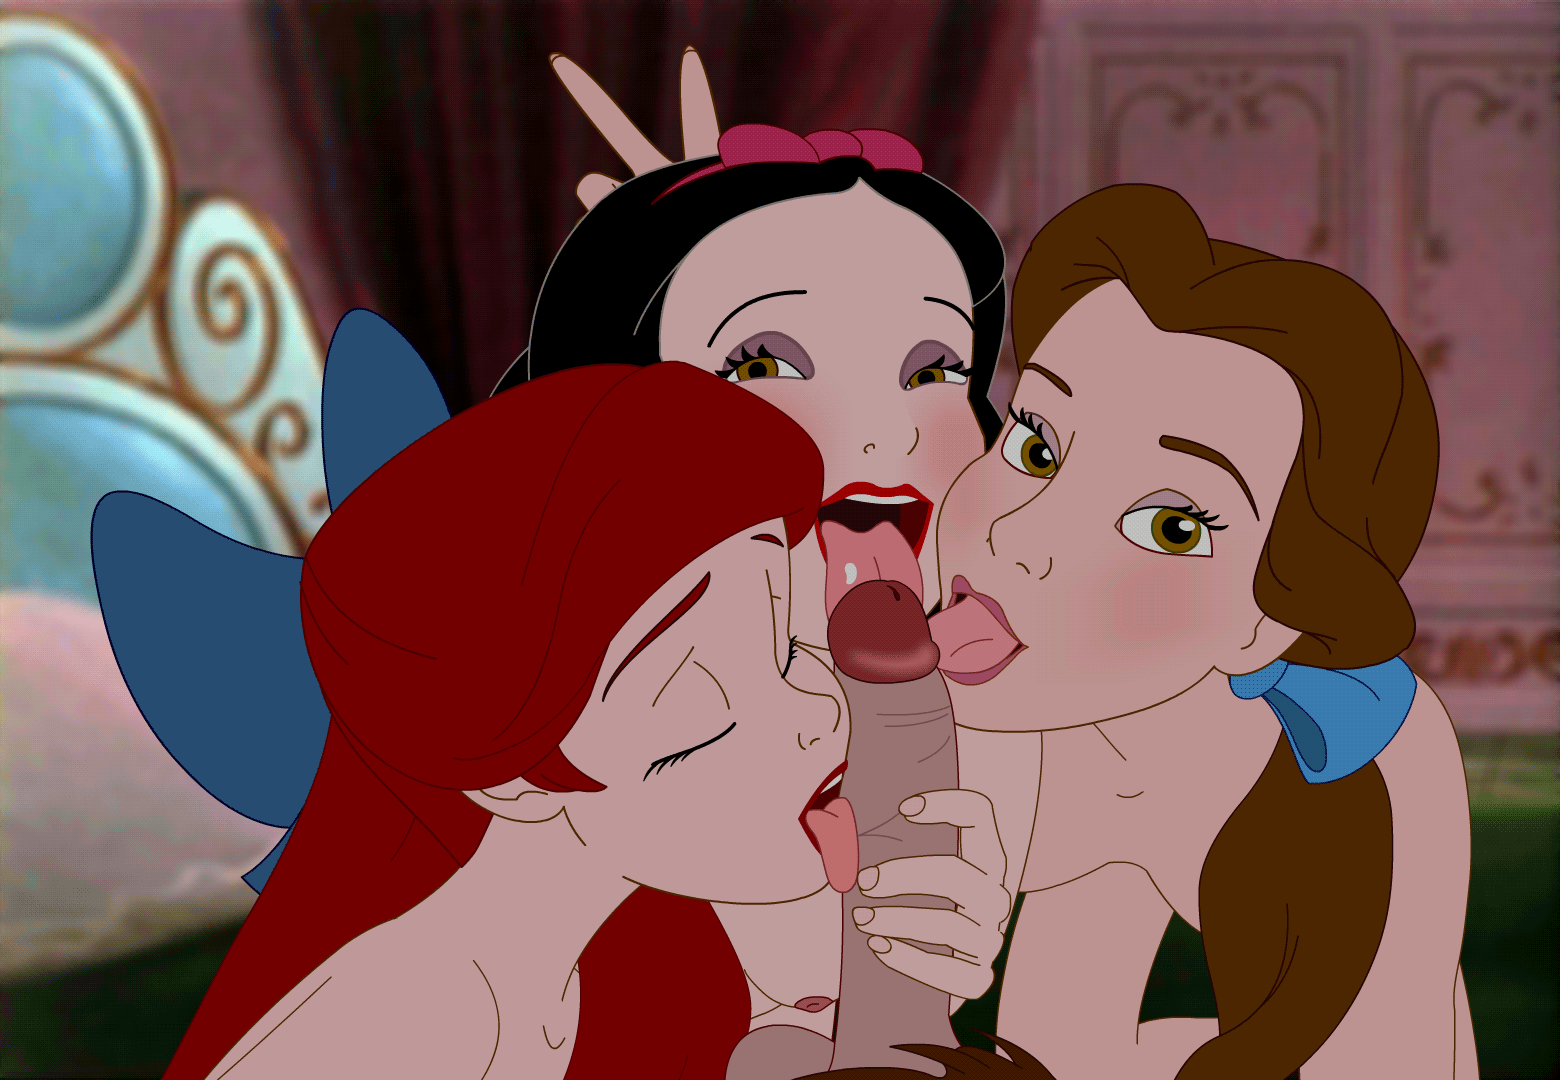 Sex porn. info gif obliging disney princesses 636ac4d3a73c0 about art-porn. Enjoy watching new porn gifs every day